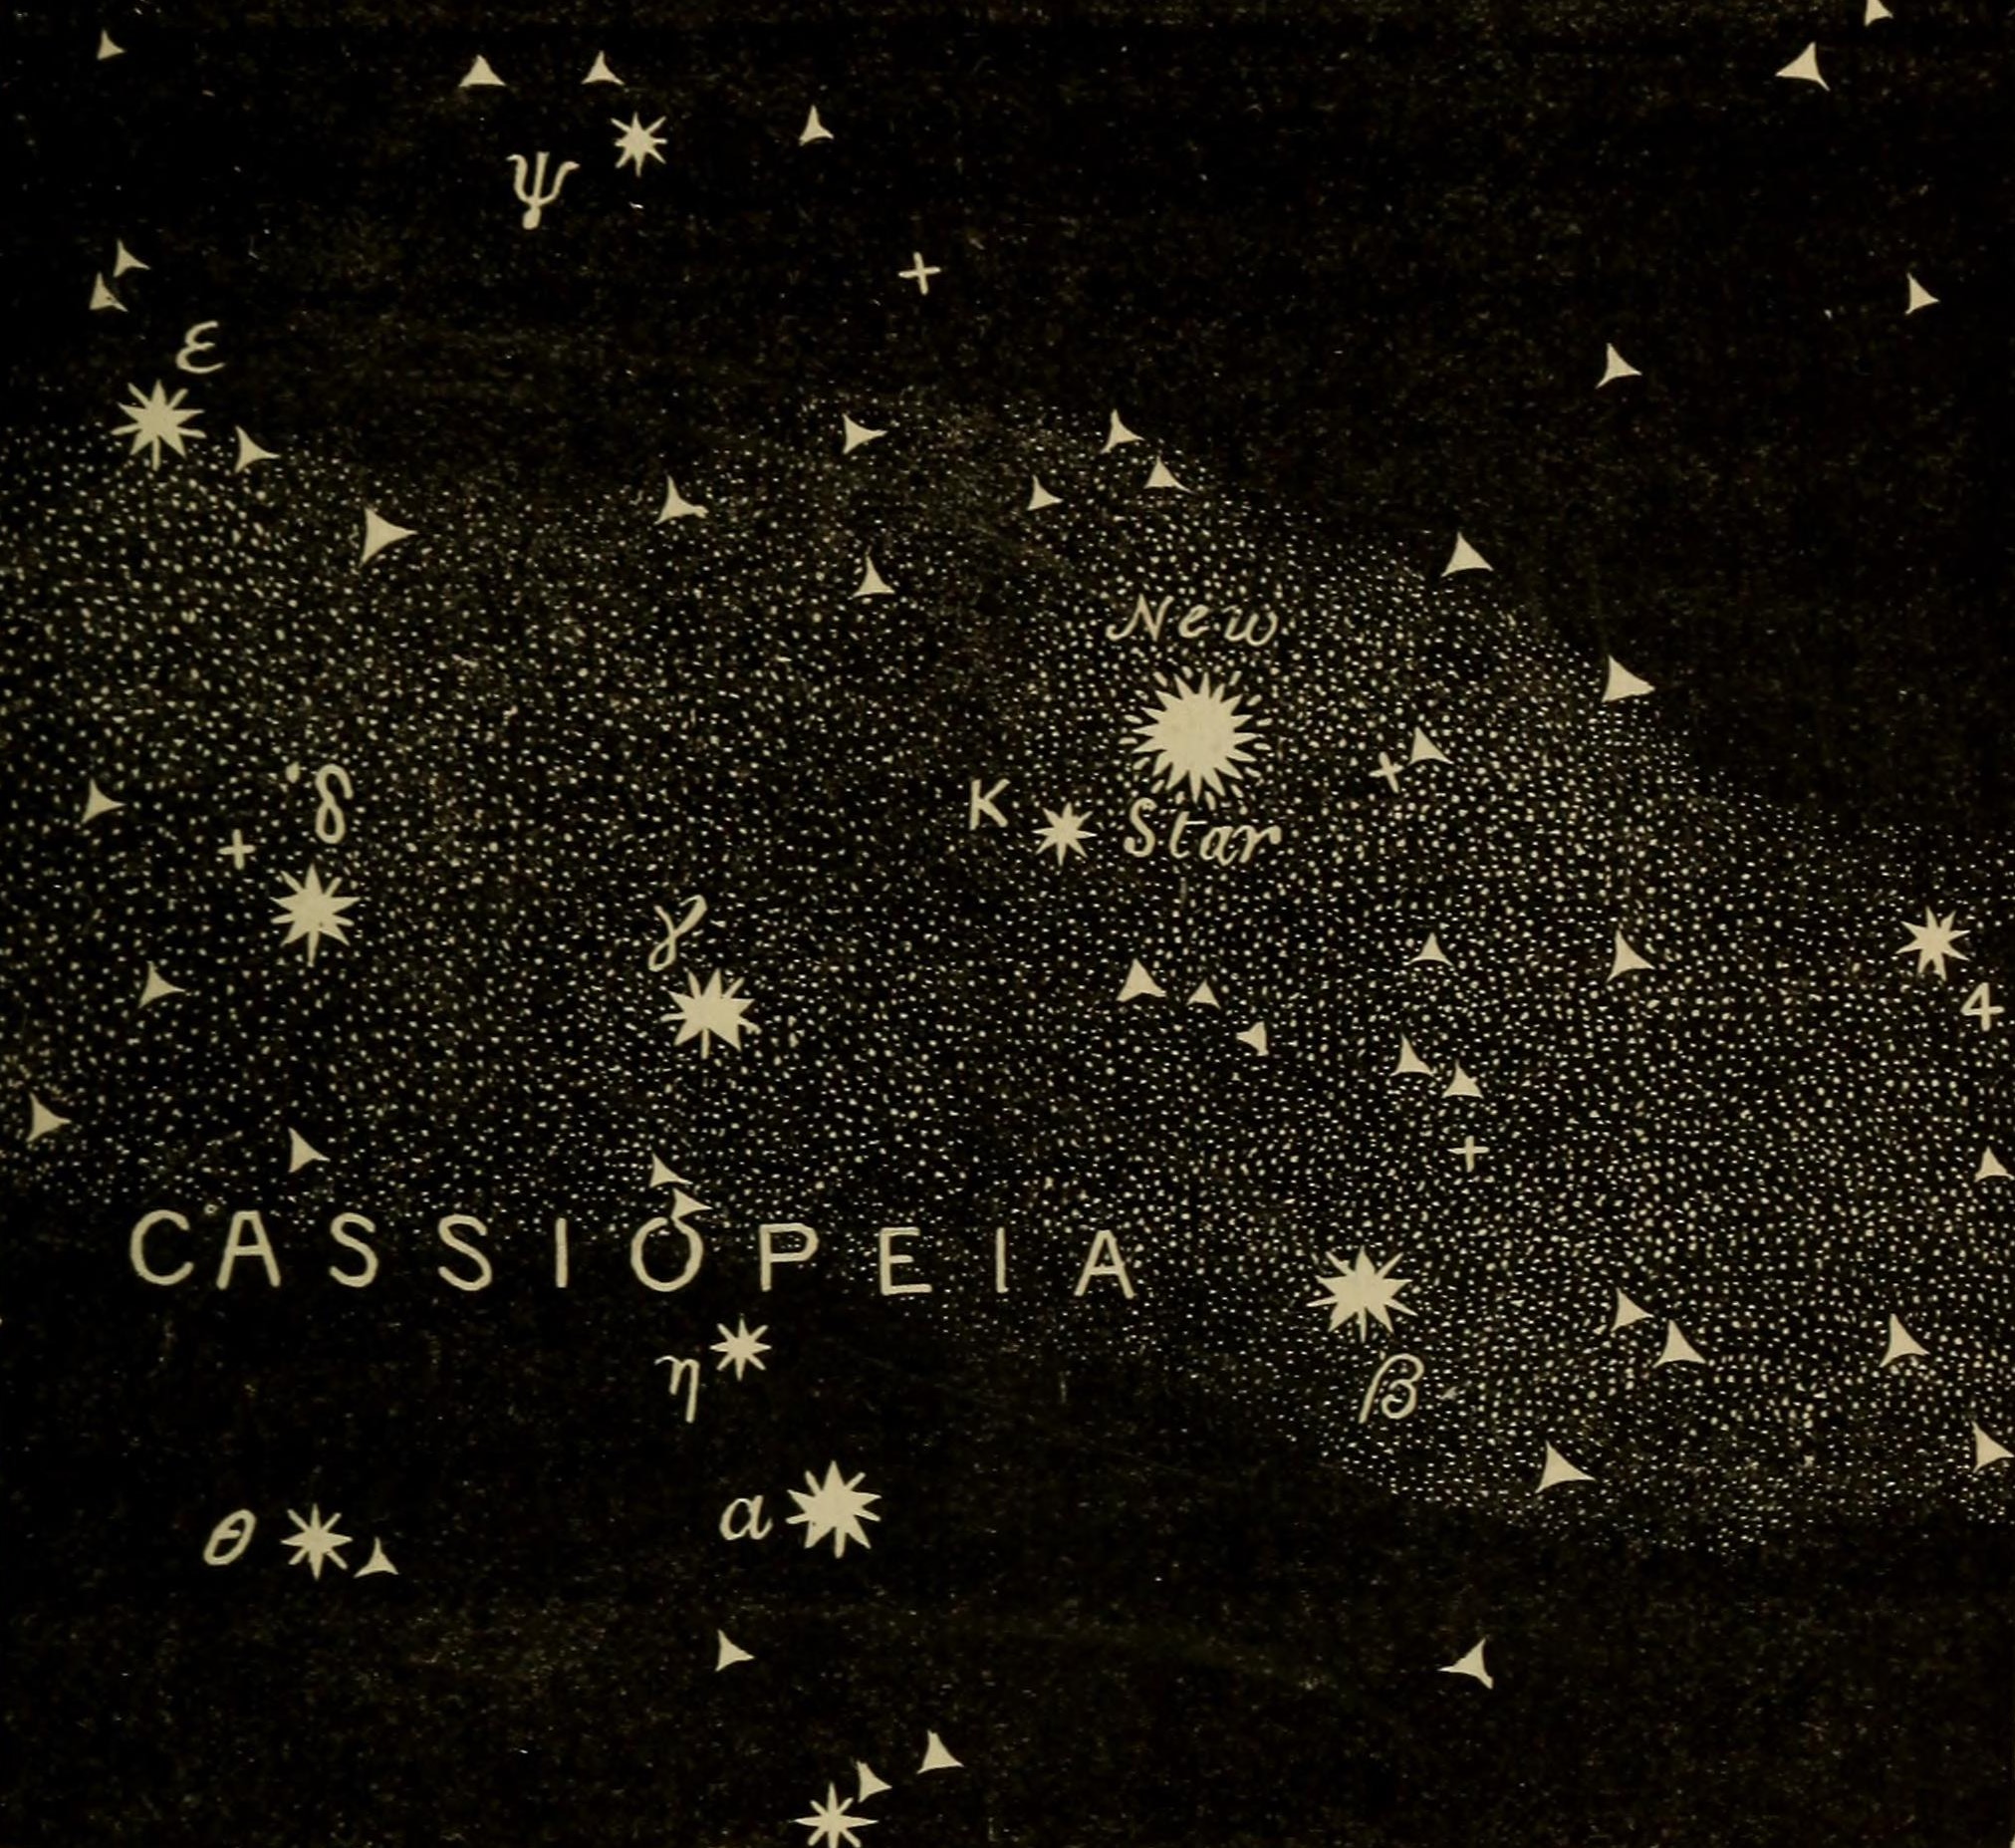 Cassiopeia ; showing where a new star appeared in 1572 Flowers of the Sky by Richard A. Proctor (1879)